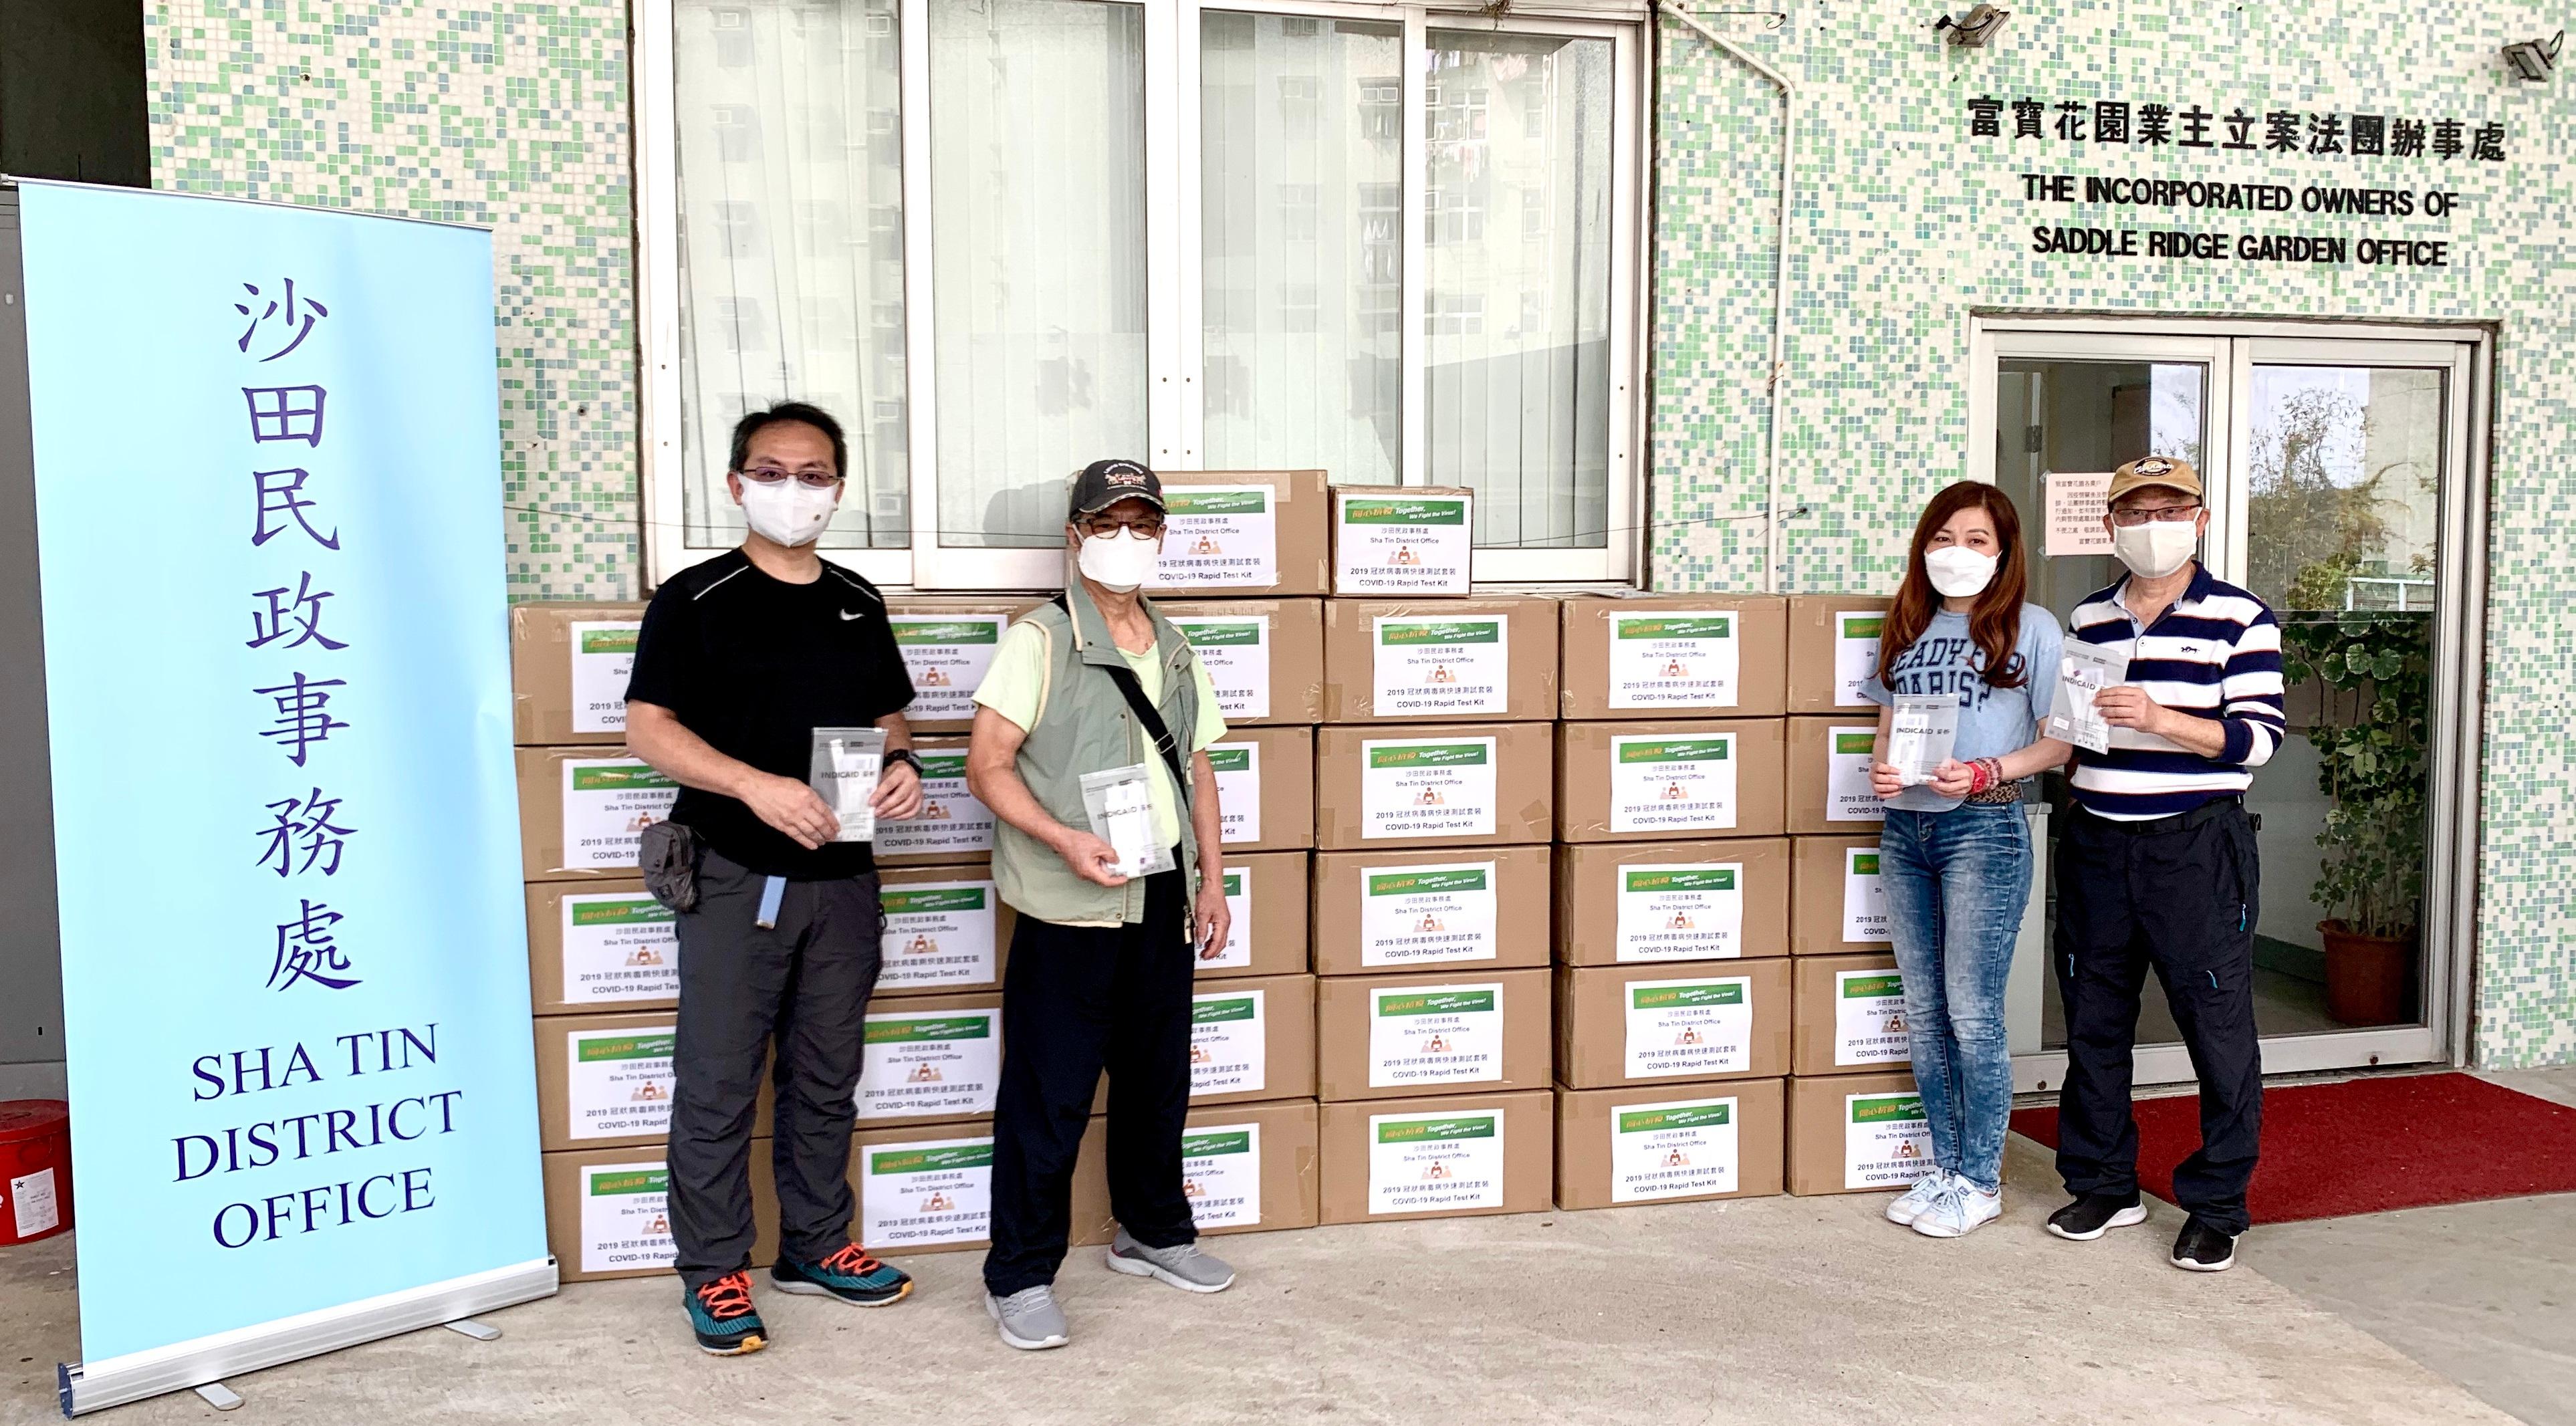 The Sha Tin District Office today (March 18) distributed COVID-19 rapid test kits to households, cleansing workers and property management staff living and working in Saddle Ridge Garden for voluntary testing through the owners' corporation.